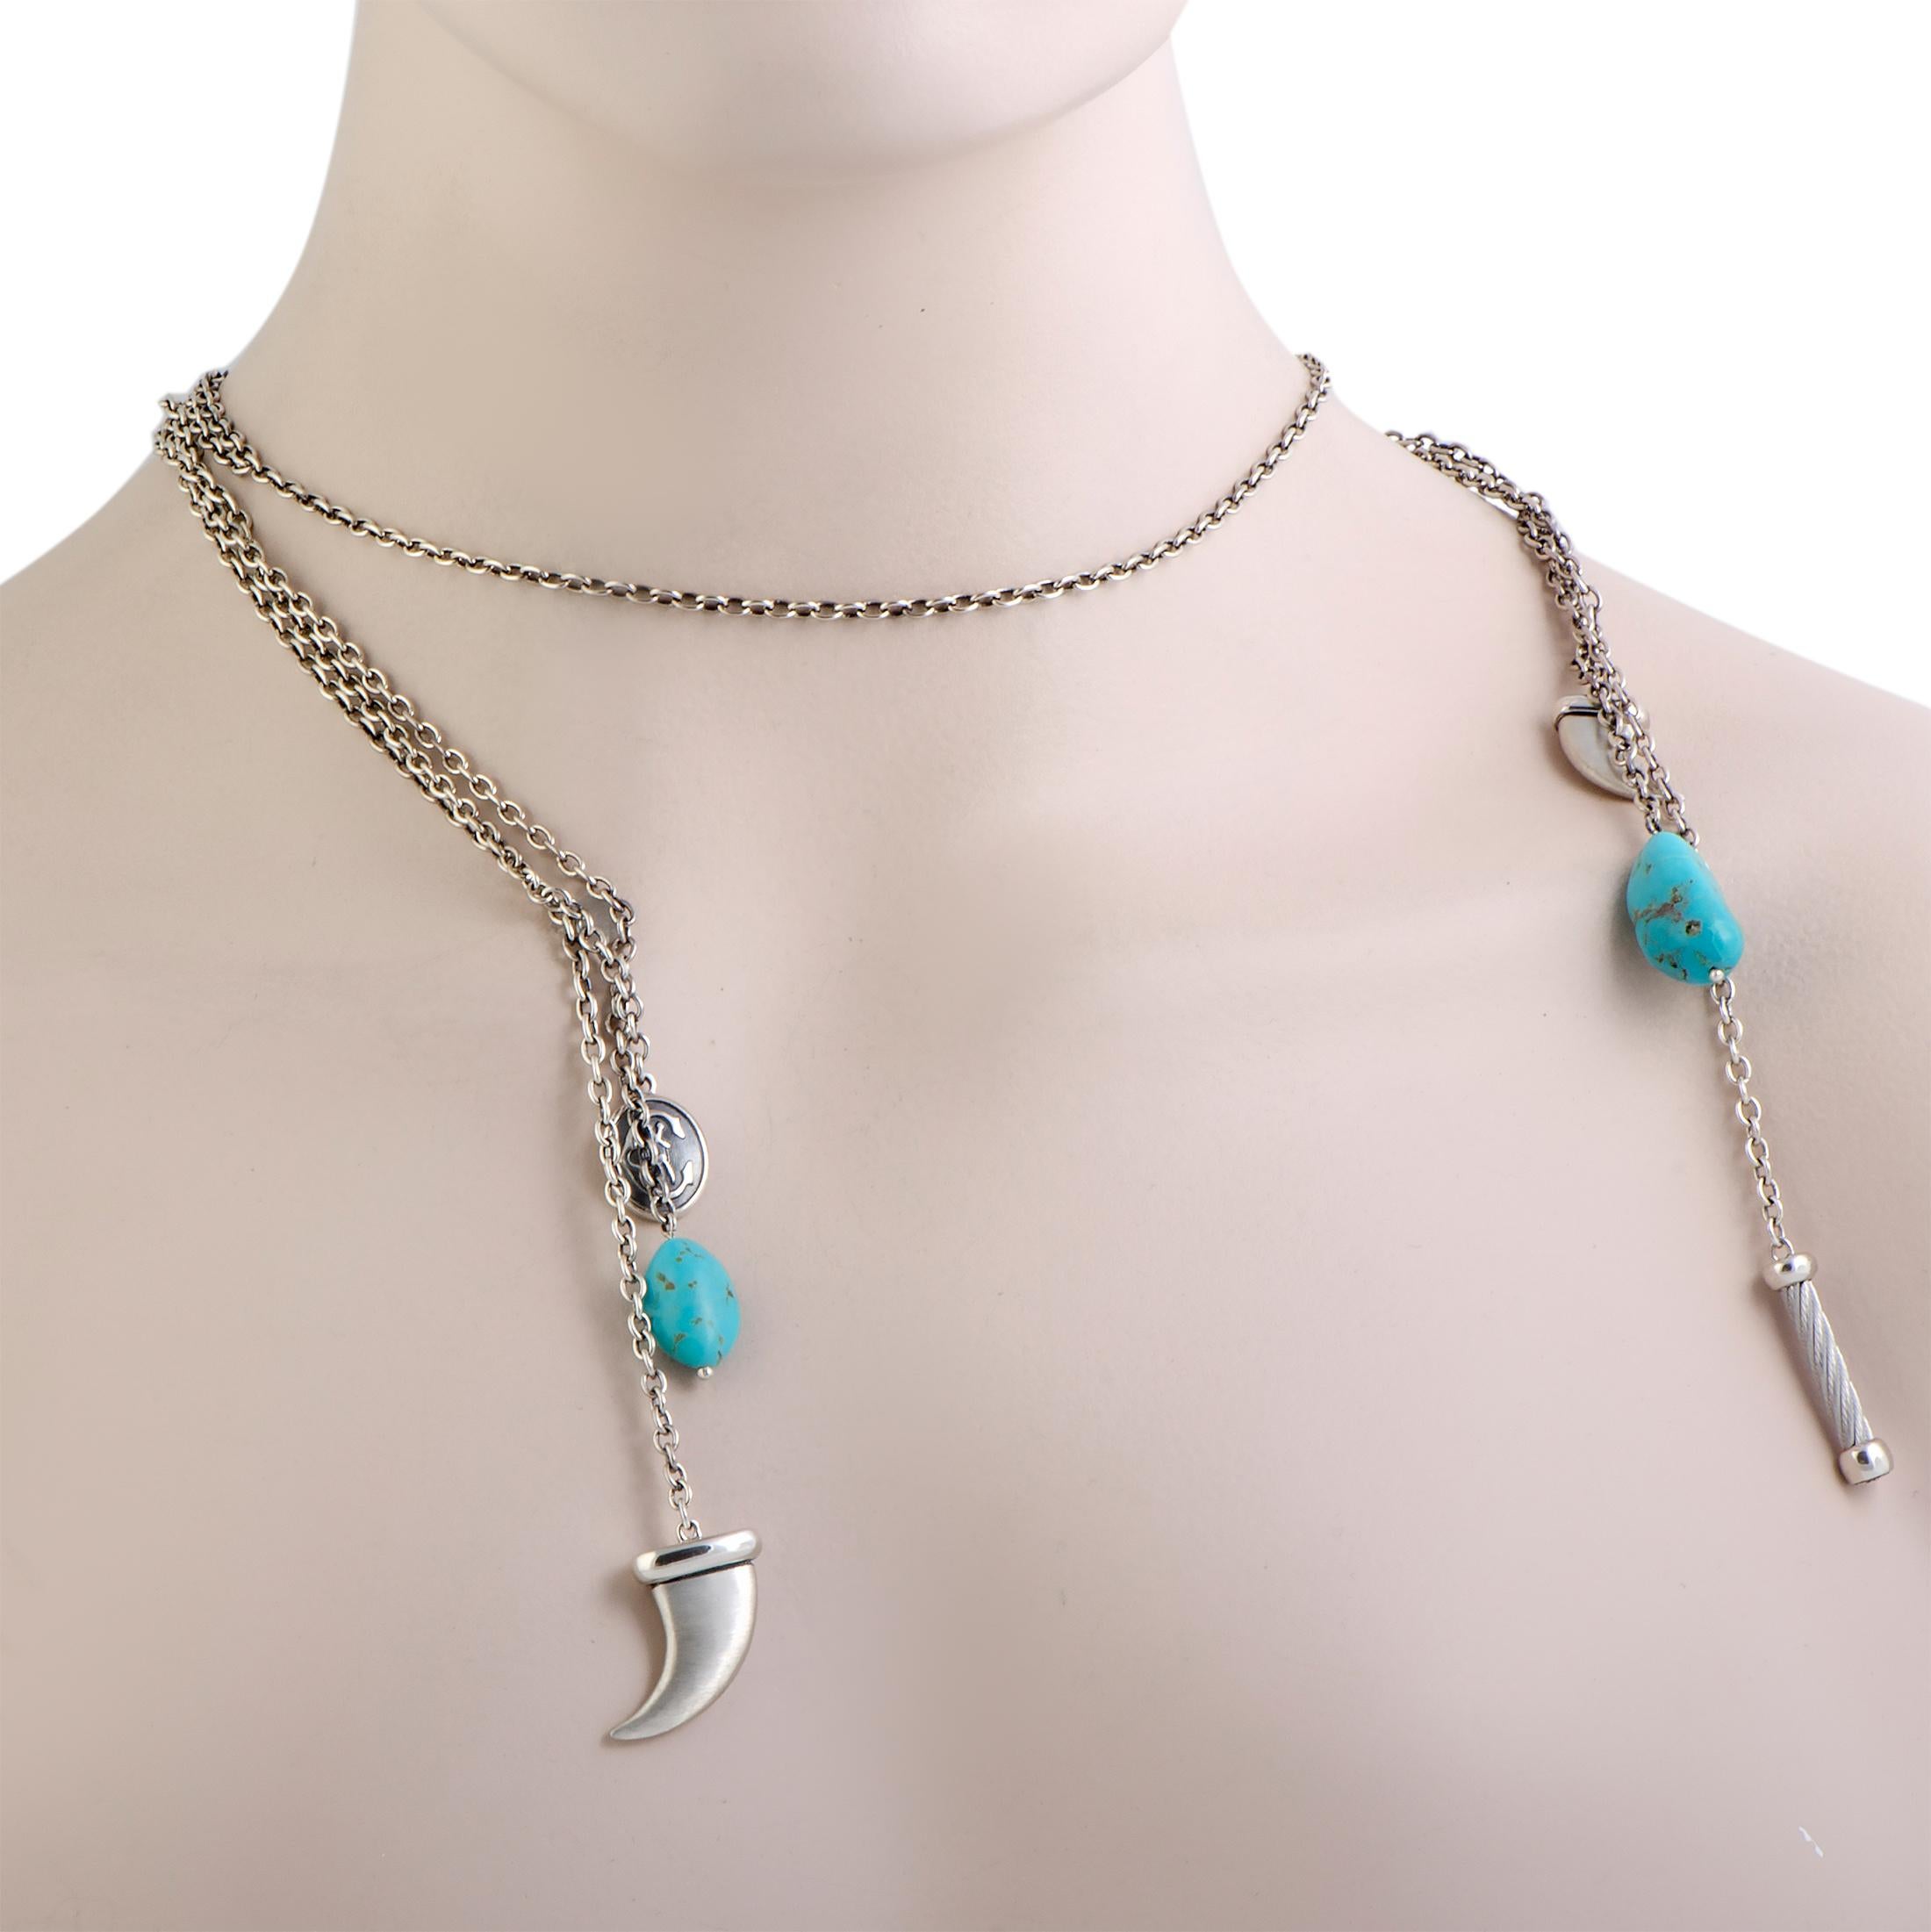 Embellished with attractive pendants and enticing turquoise stones, this extraordinarily designed “Kucha” necklace from Charriol offers an intriguingly fashionable look. The necklace is beautifully made of stainless steel and it weighs 57 grams.